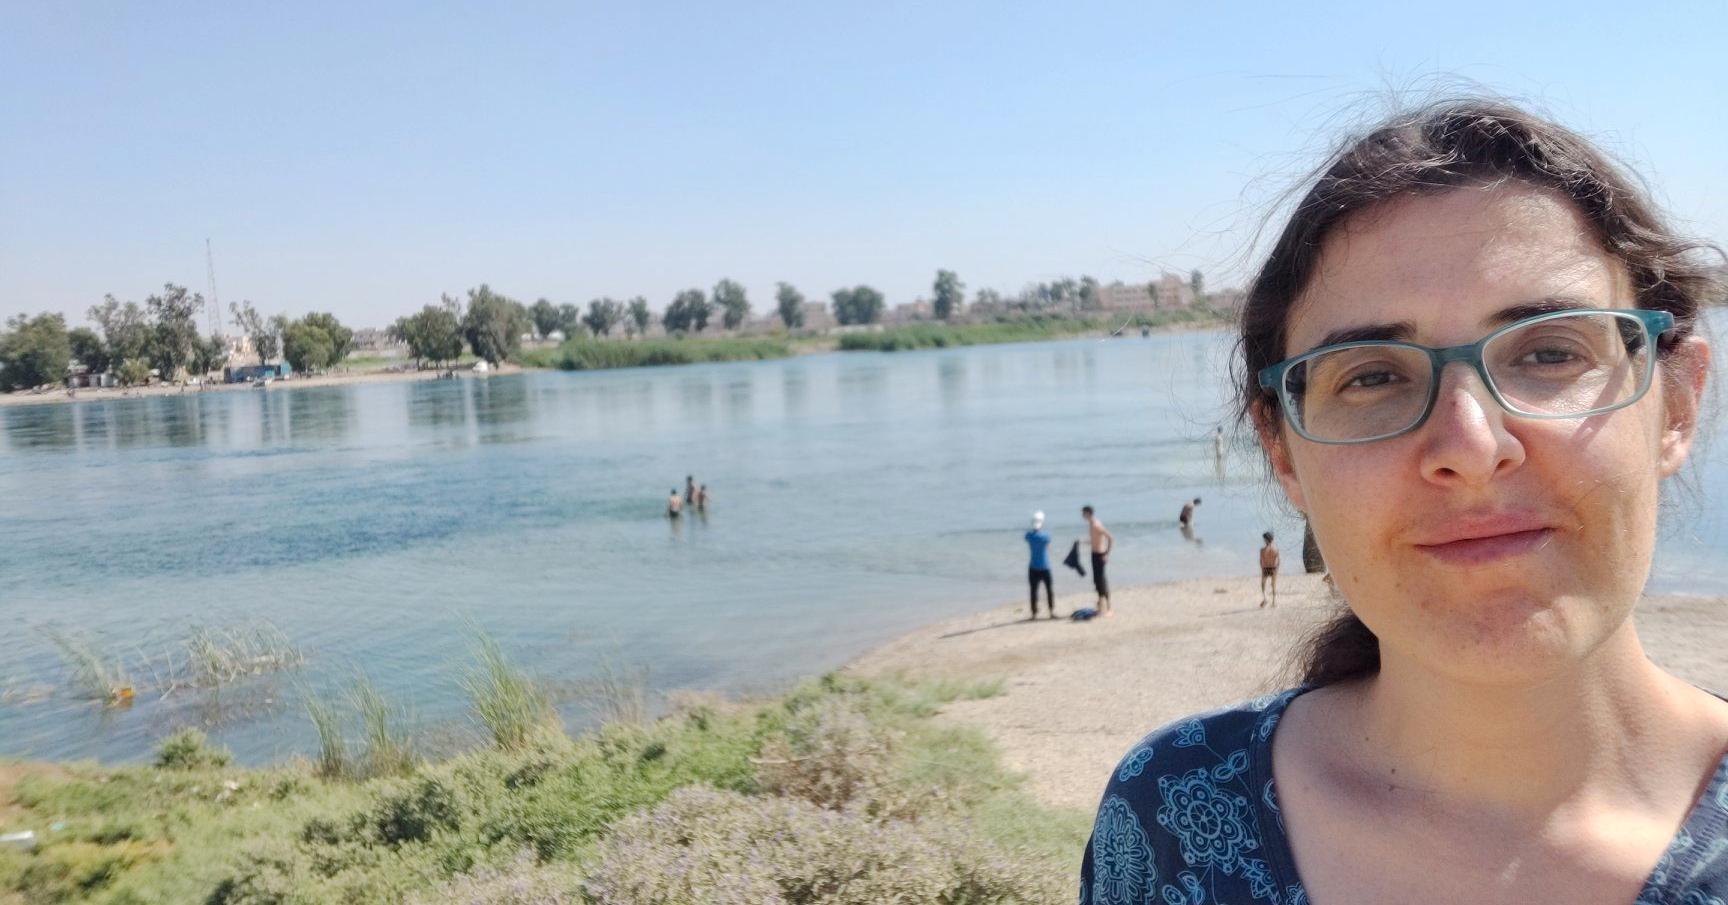 Israeli Researcher Elizabeth Tsurkov Kidnapped in Iraq: Negotiations with Arch-Enemy for Her Release